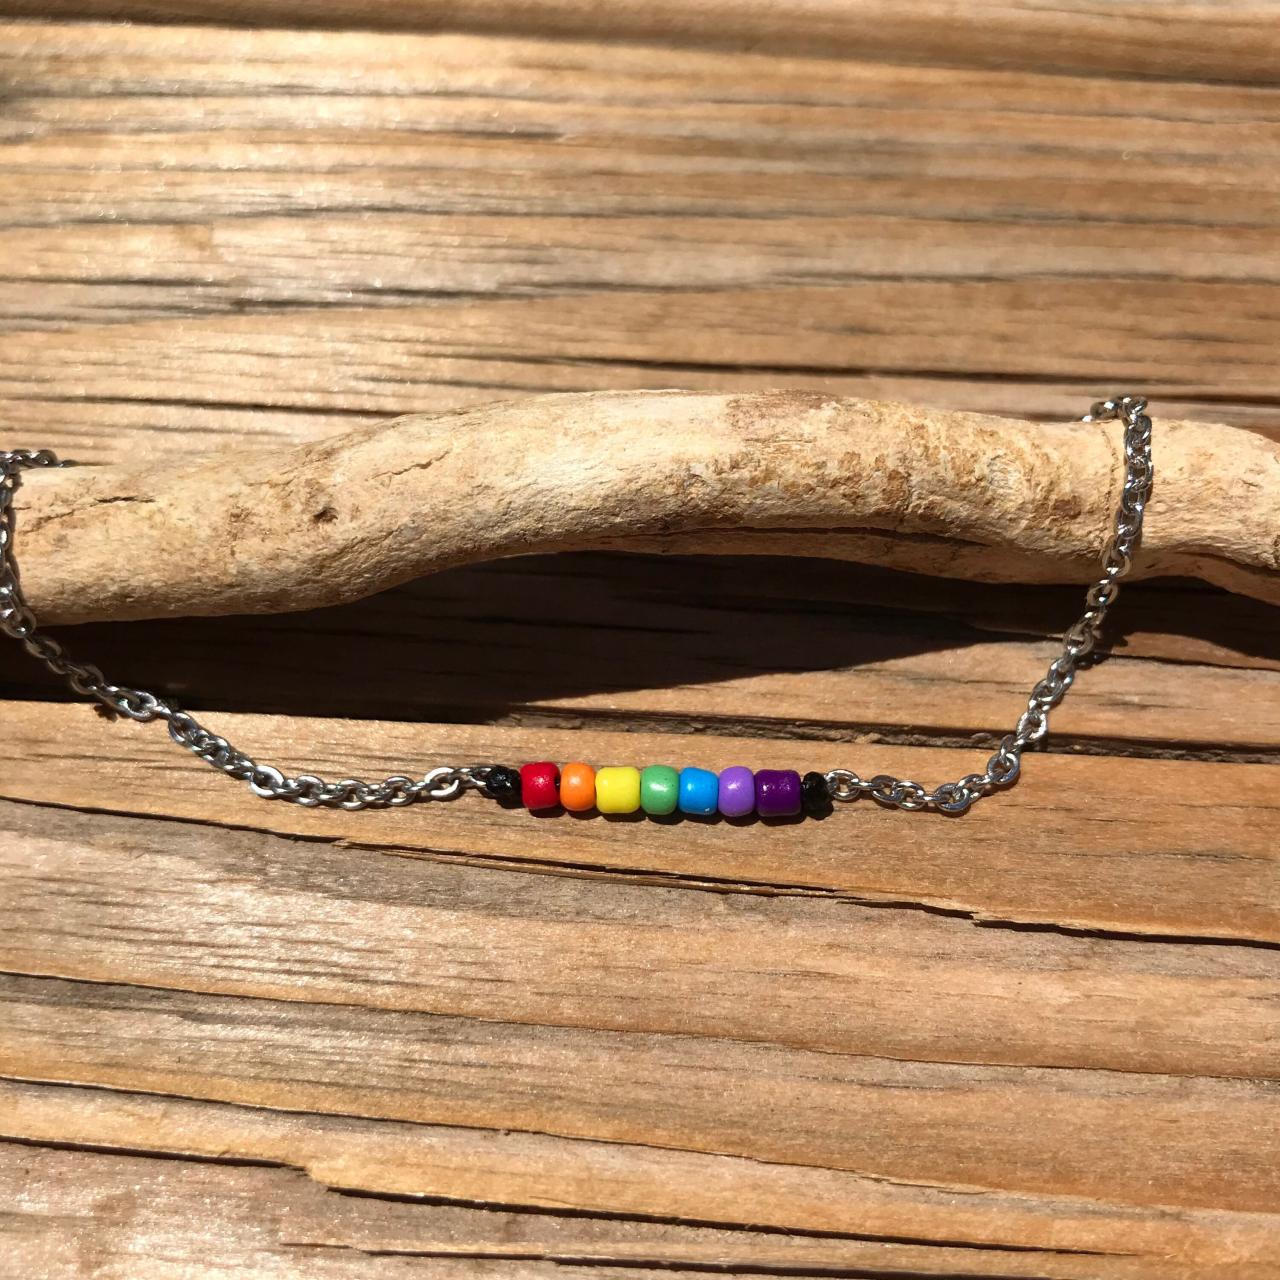 Pride jewelry, Chain Beaded Rainbow Bracelet with BLACK cord tying the beads to chain, Steel chain and lobster claw, Love is Love, LGBTQIA